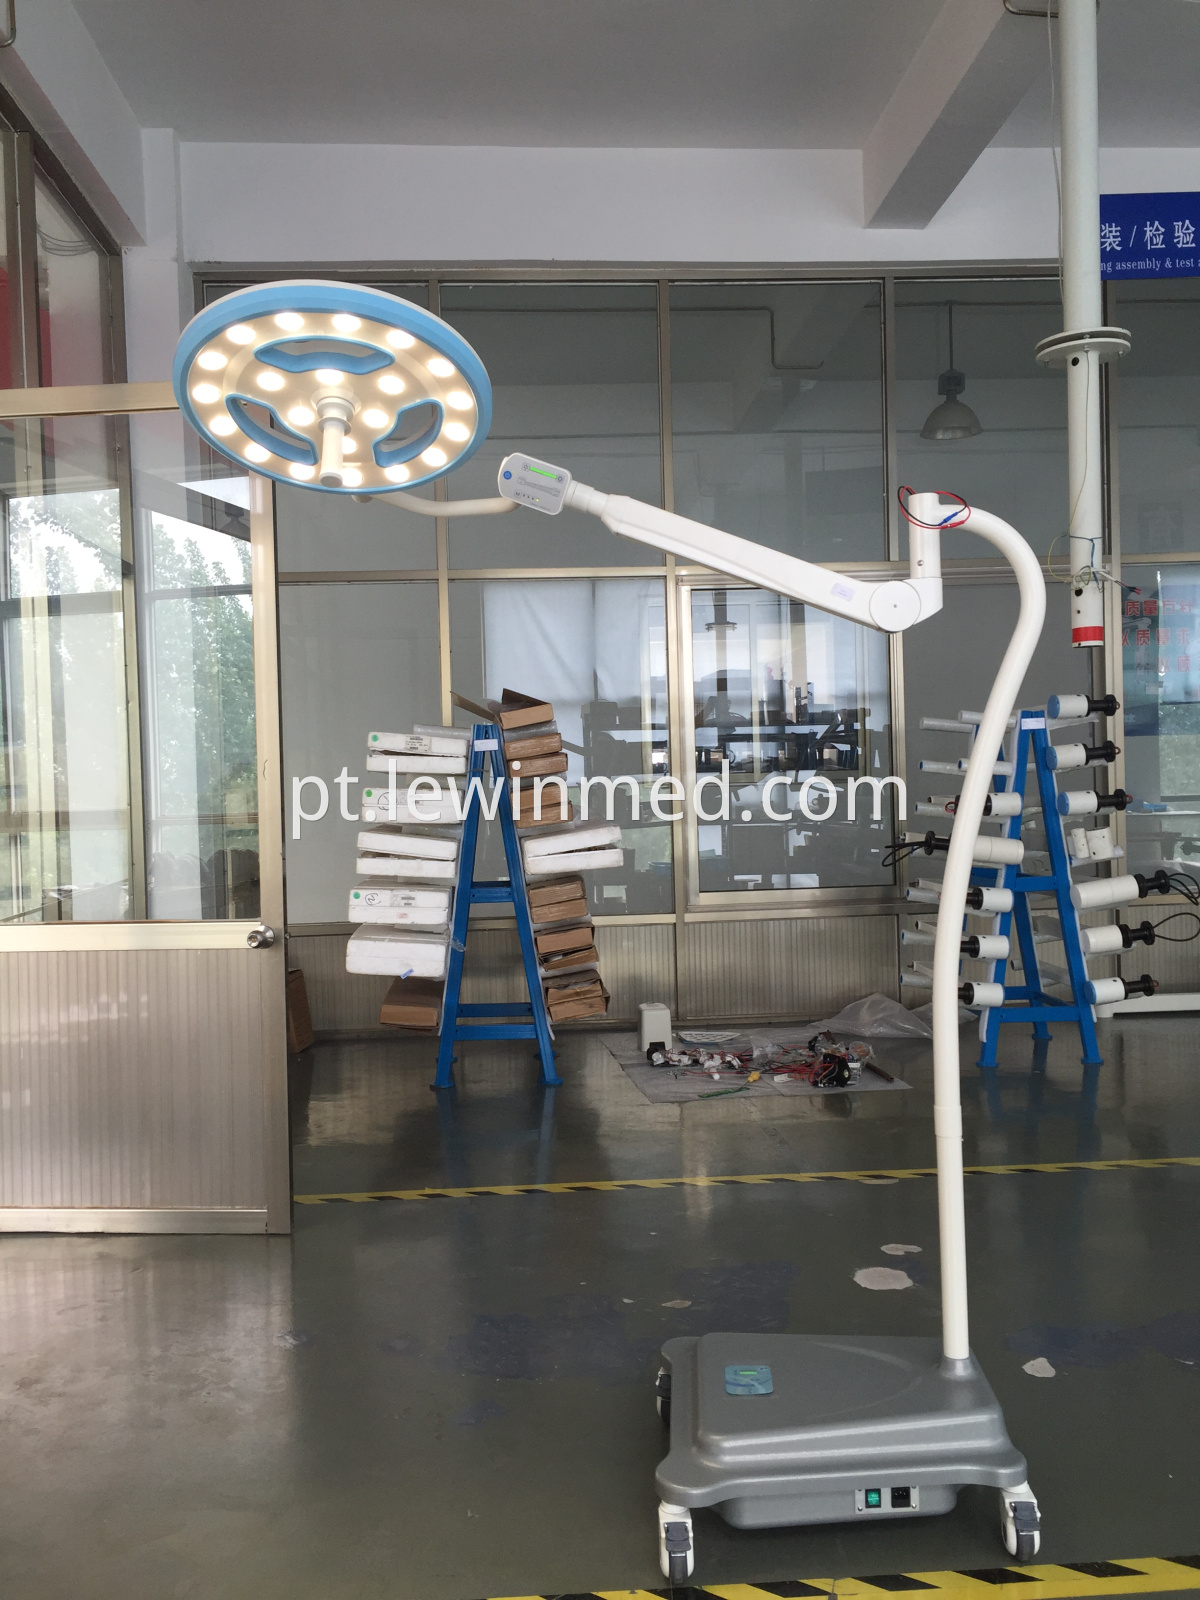 Cold light mobile operation lamp